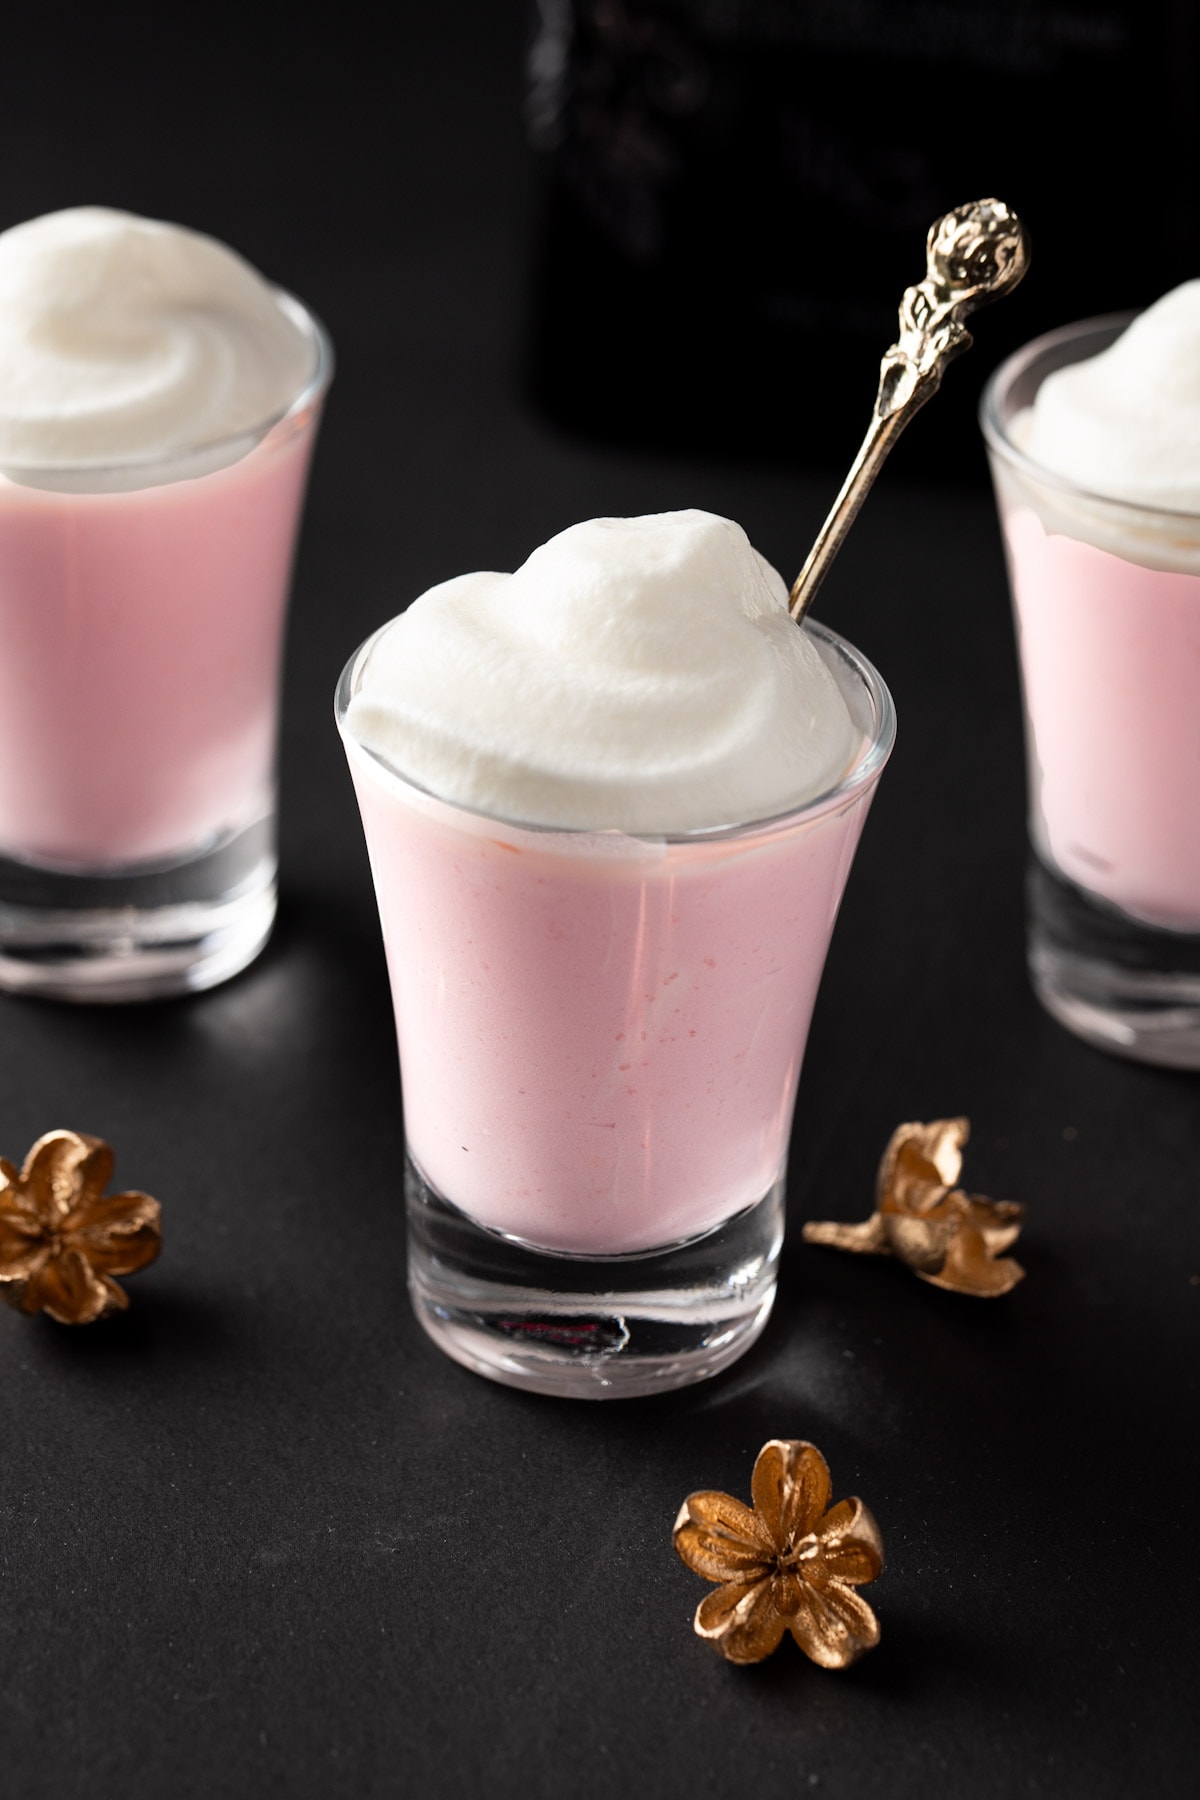 Strawberry pudding shots topped with whipped cream, on a black table.